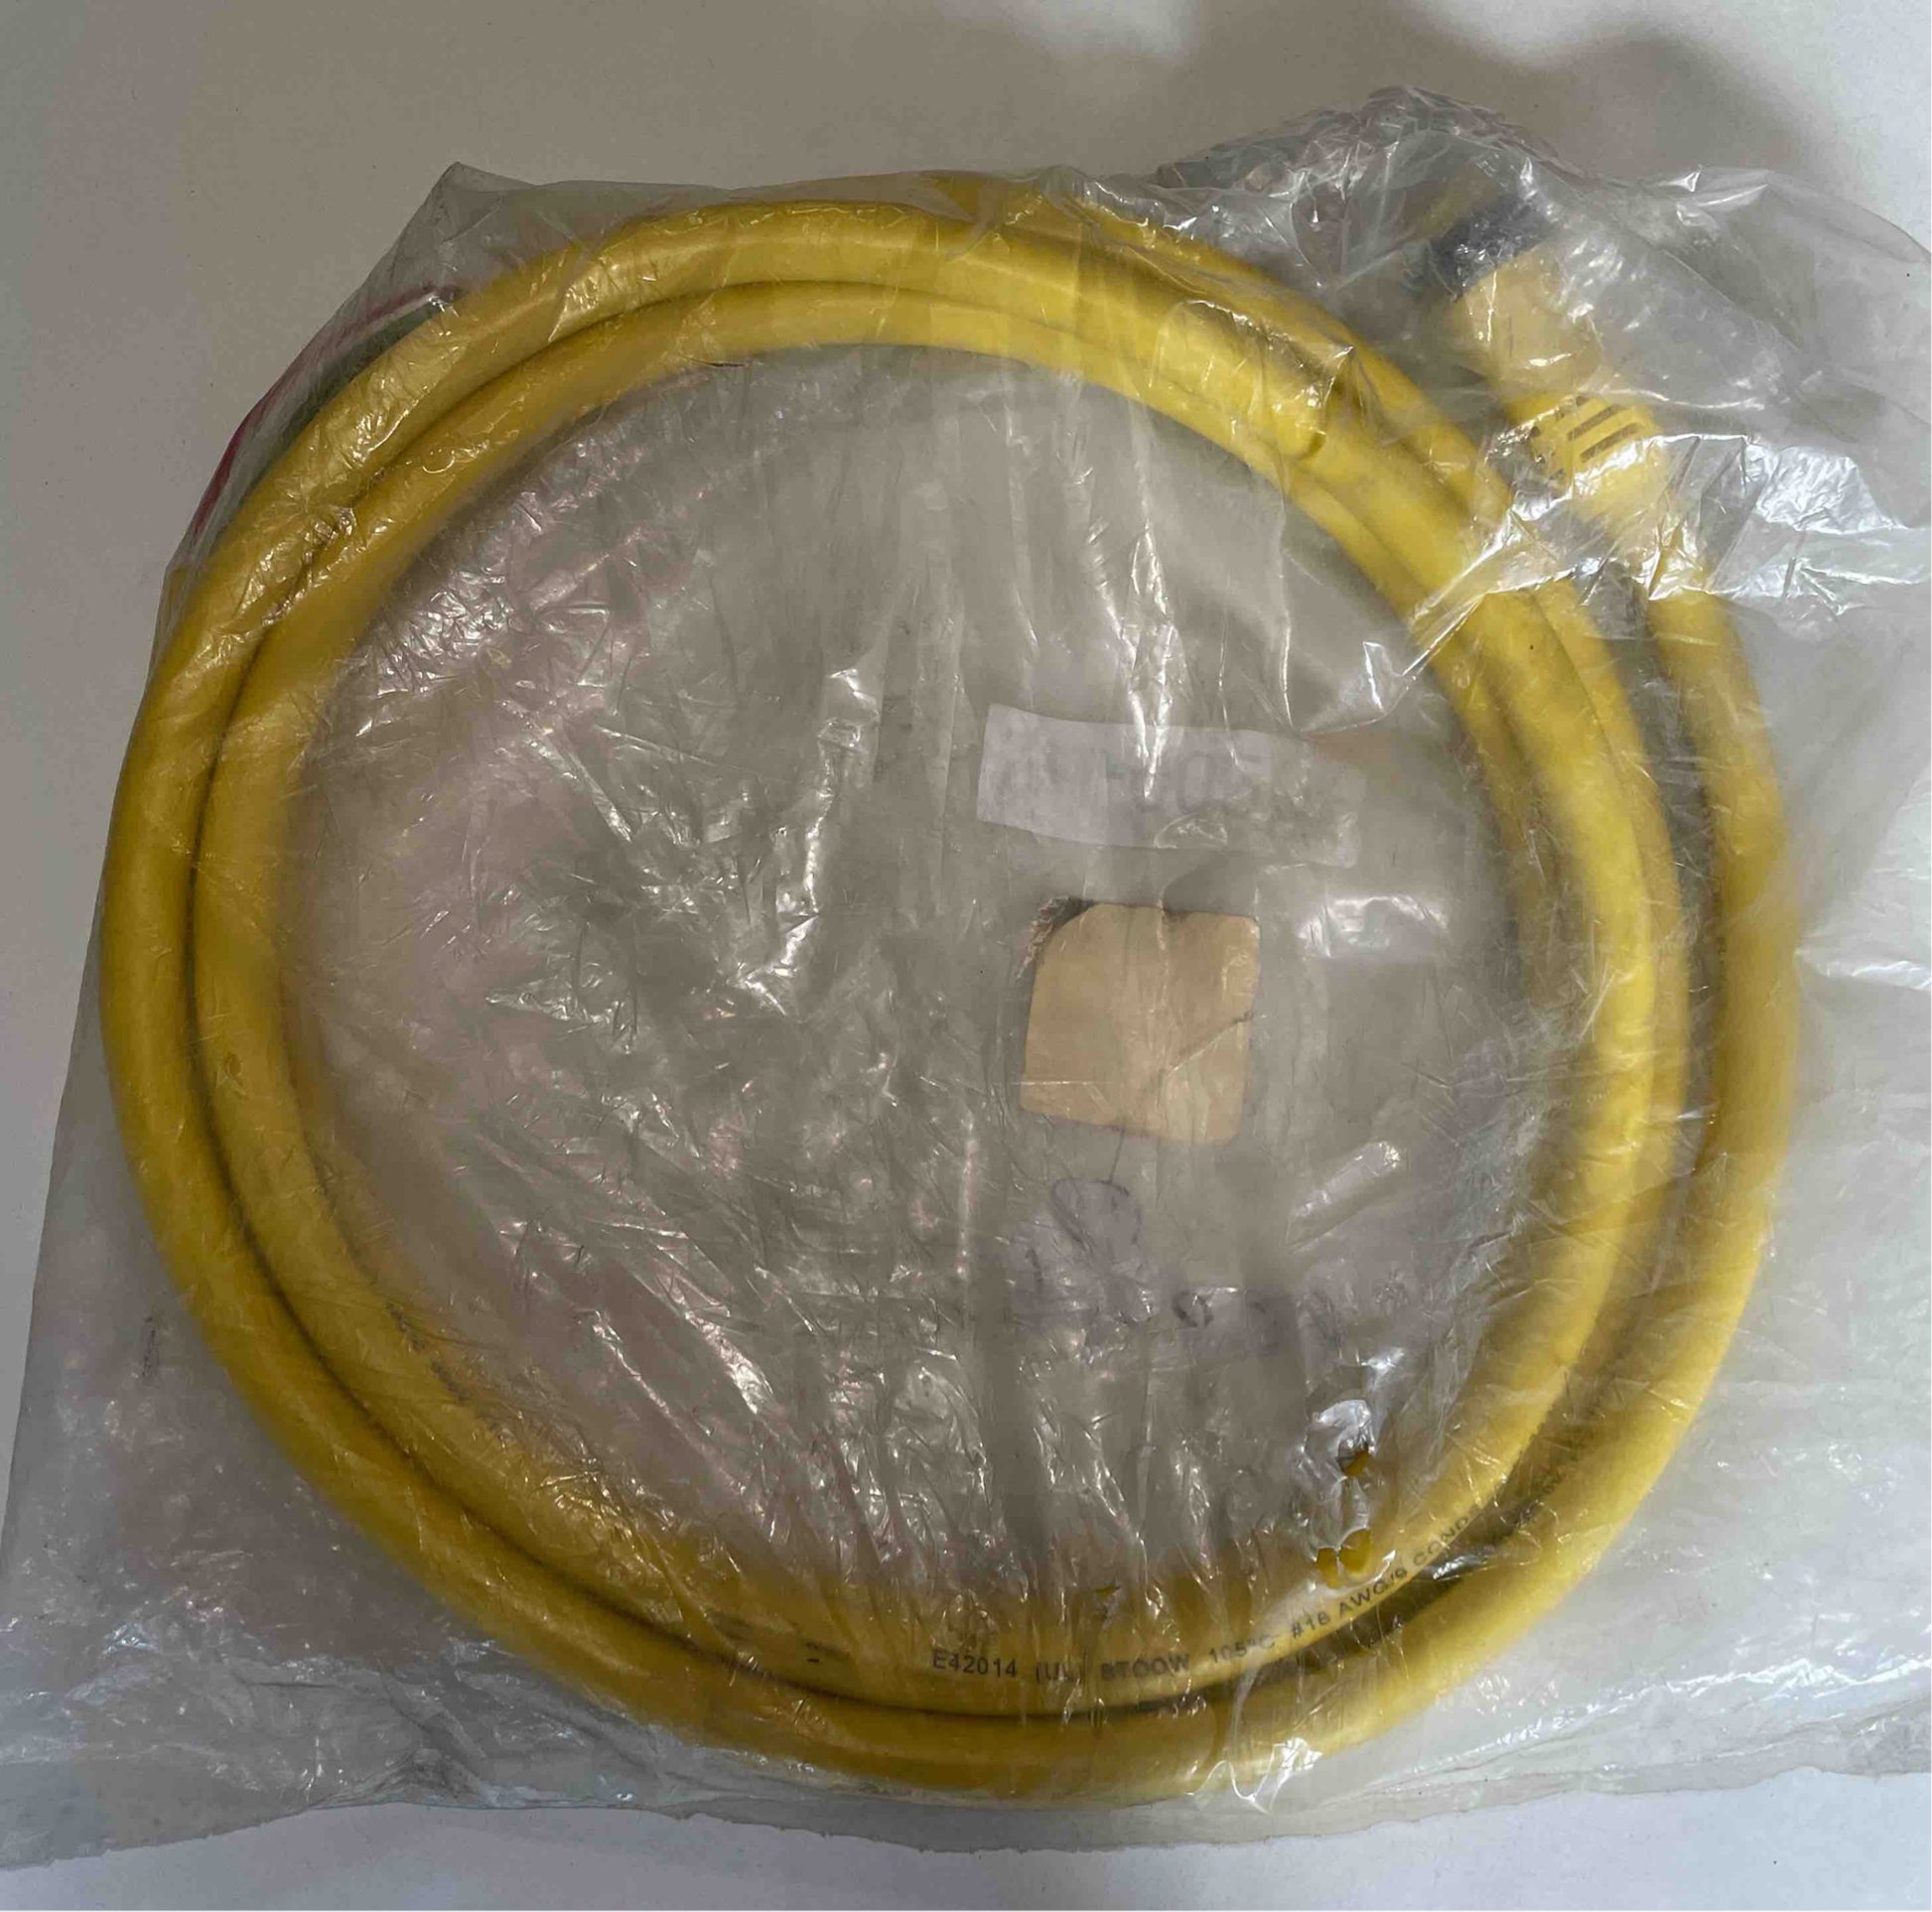 EH-0020 

Cable
EH-0020, 51210 